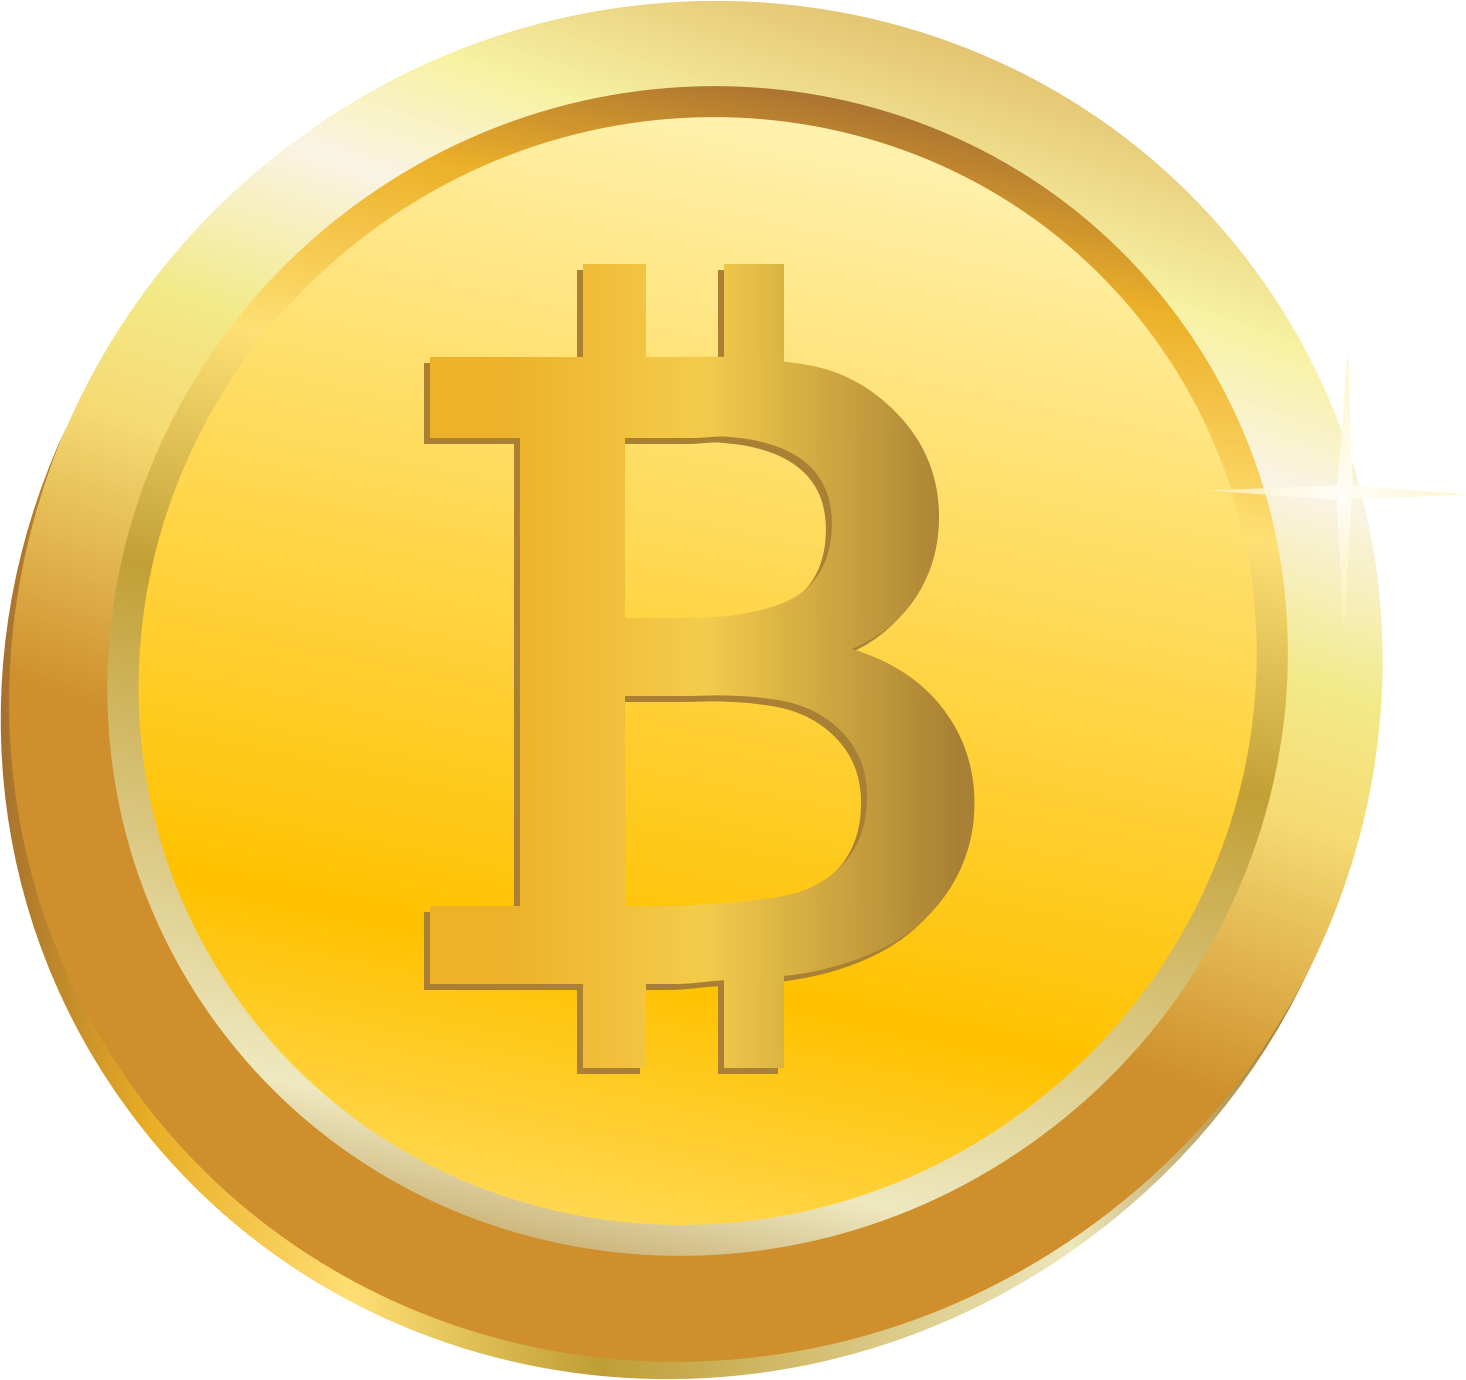 Cryptocurrency Money Steemit Bitcoin Bank Free Transparent Image HQ PNG Image